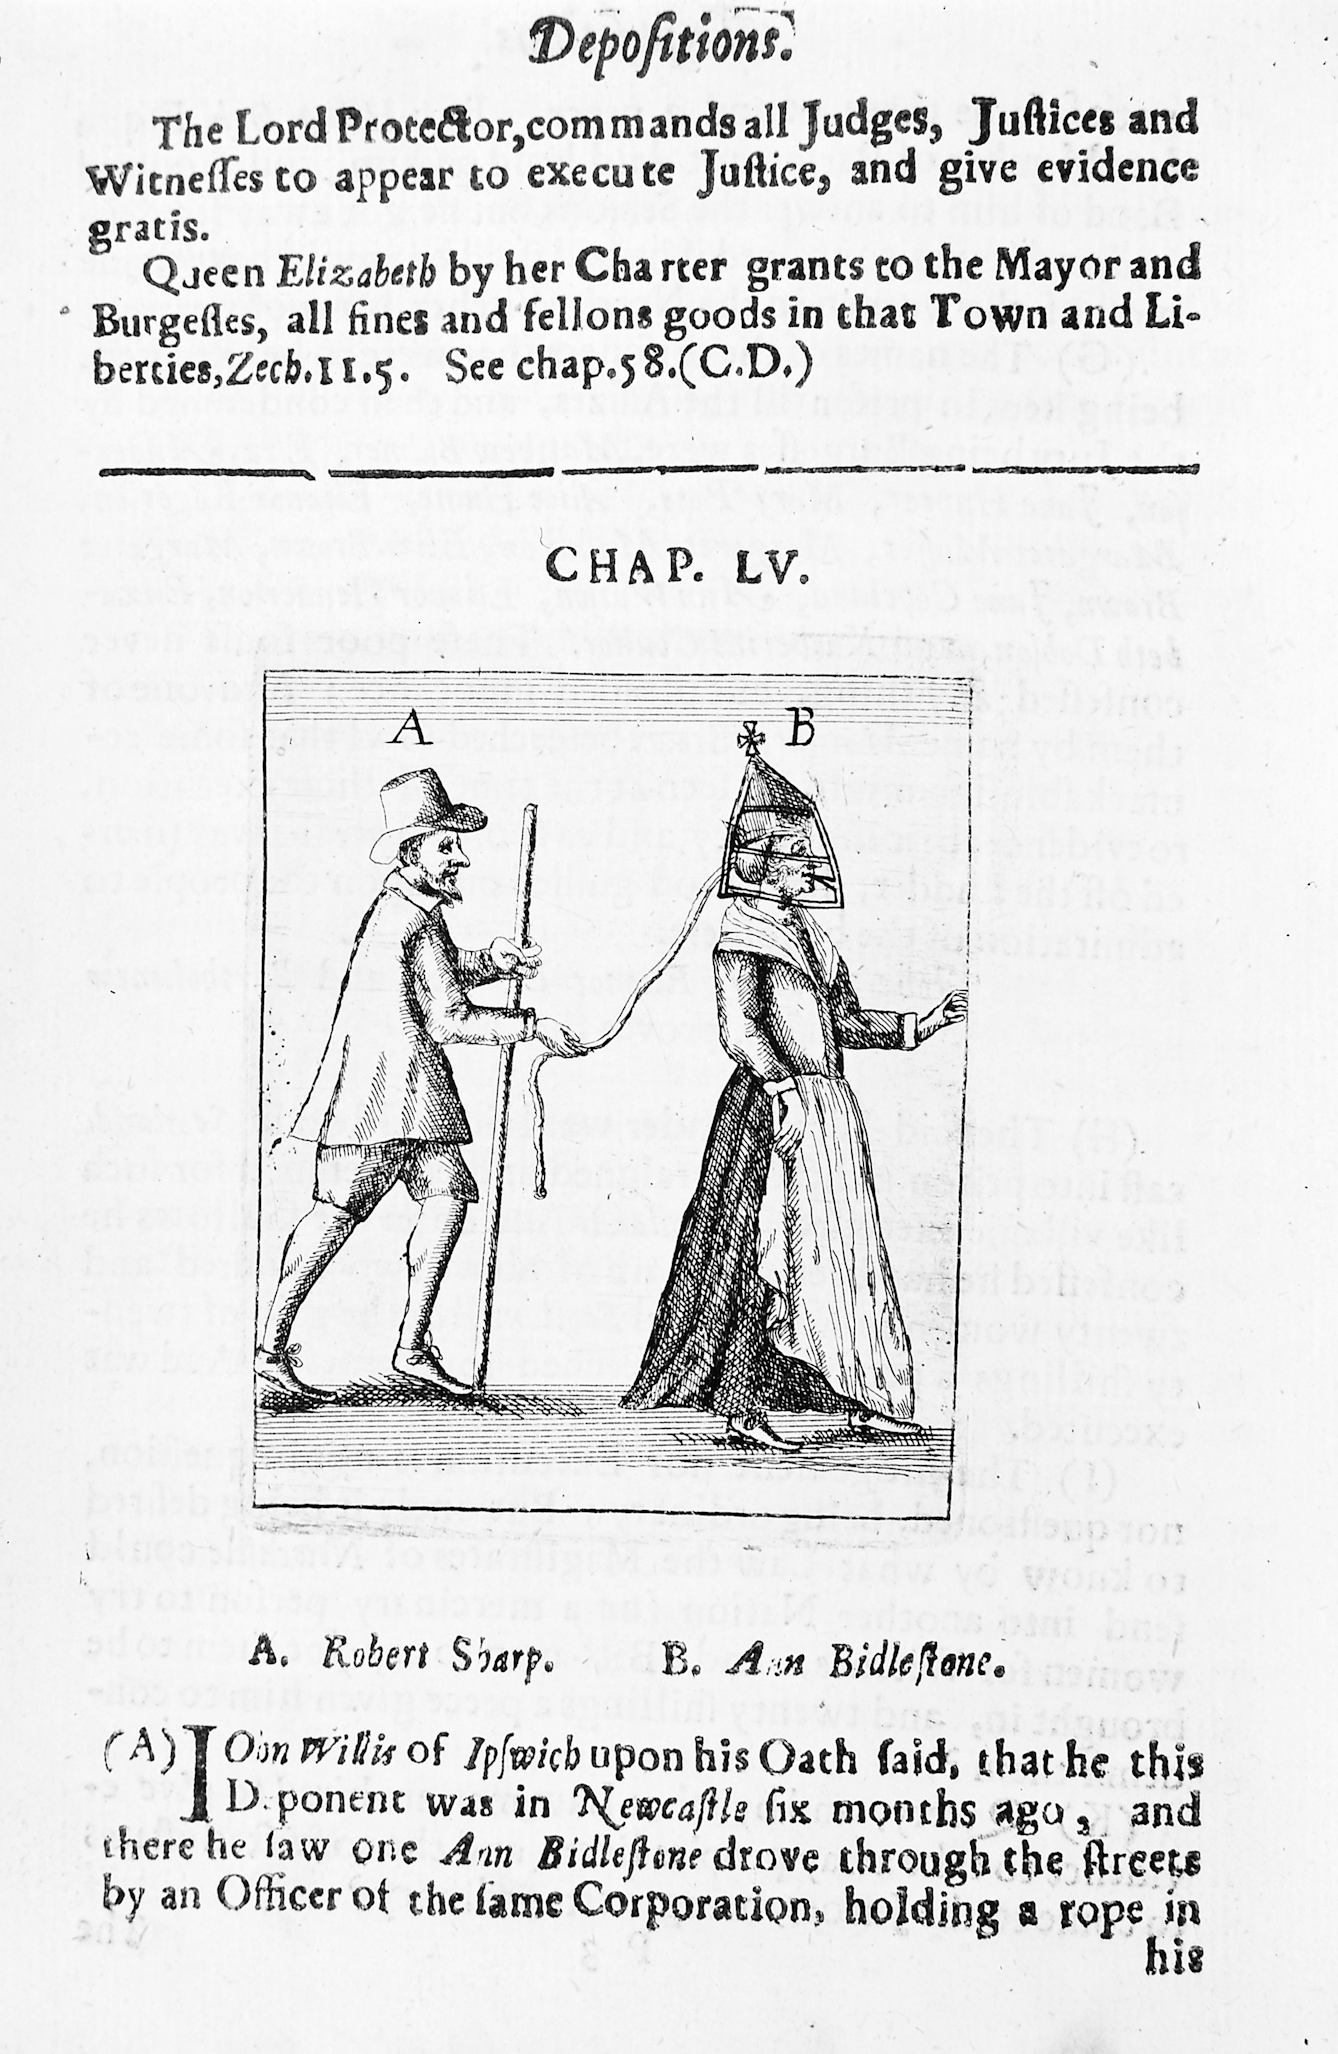 Black and white book illustration showing a man and a woman, the woman is on a leash and wearing a bridle.